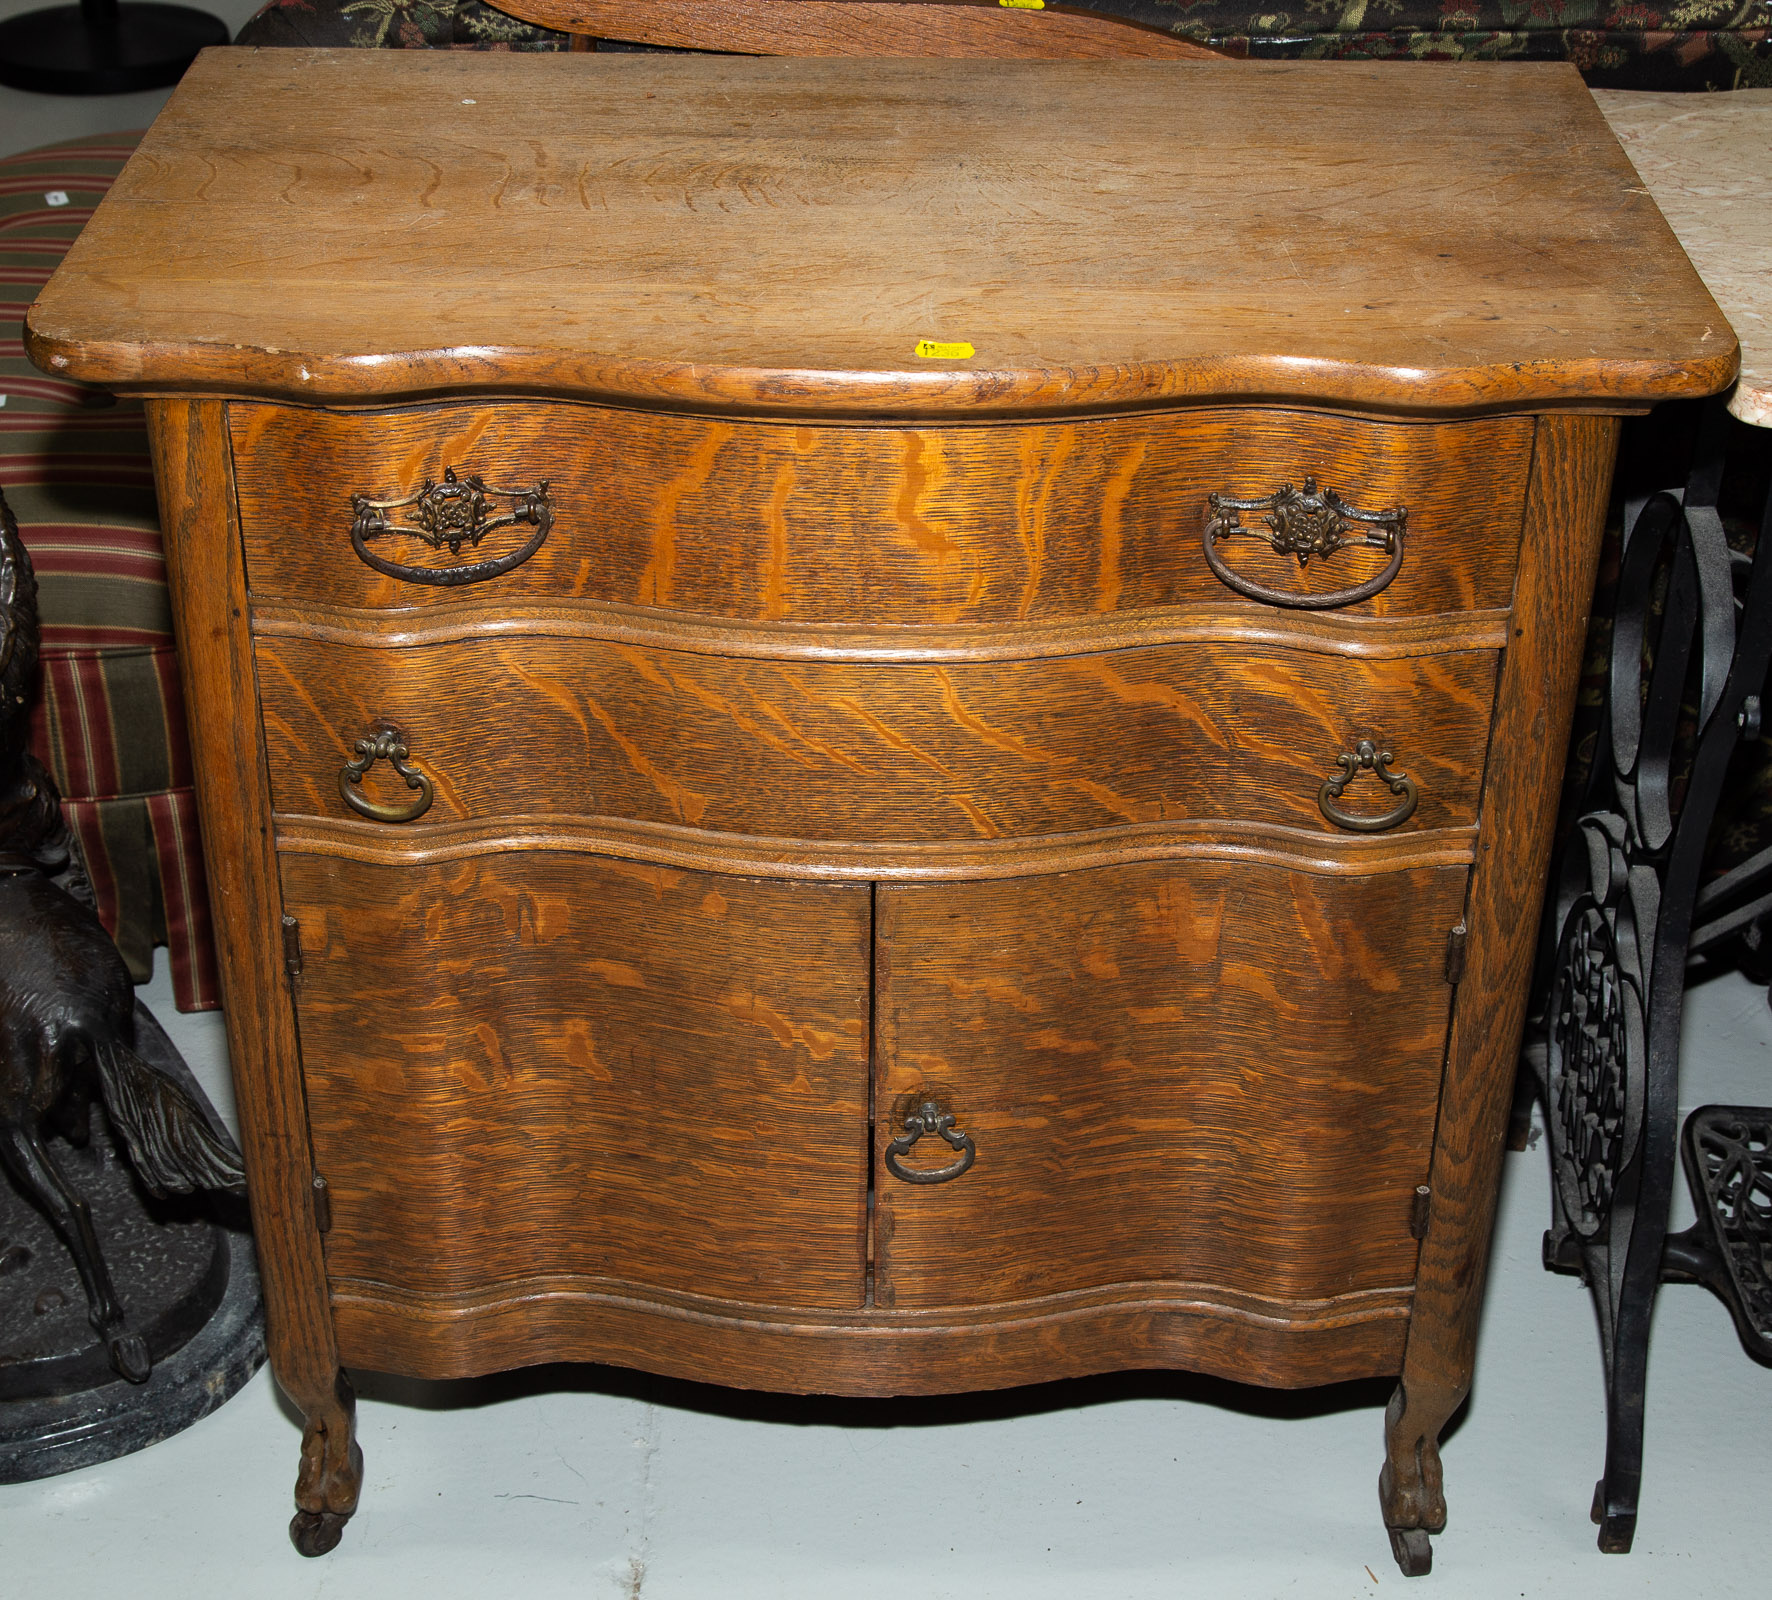 TURN OF THE CENTURY OAK WASH STAND